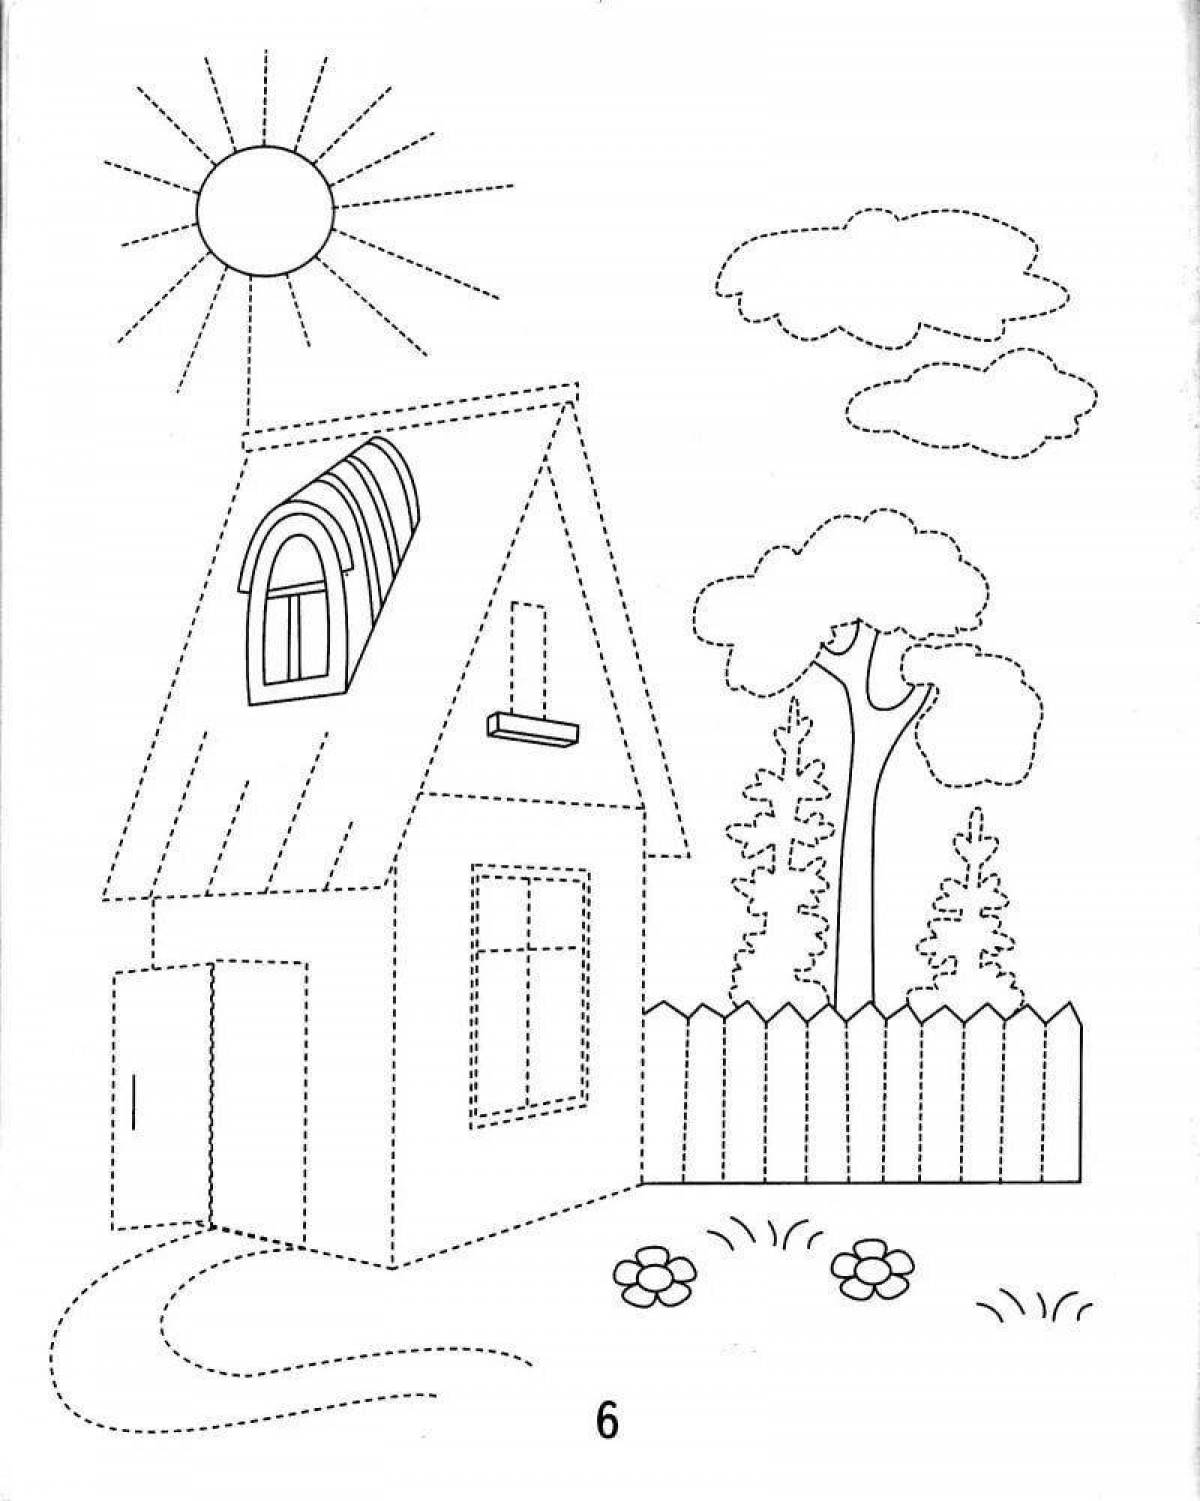 Fancy house coloring page